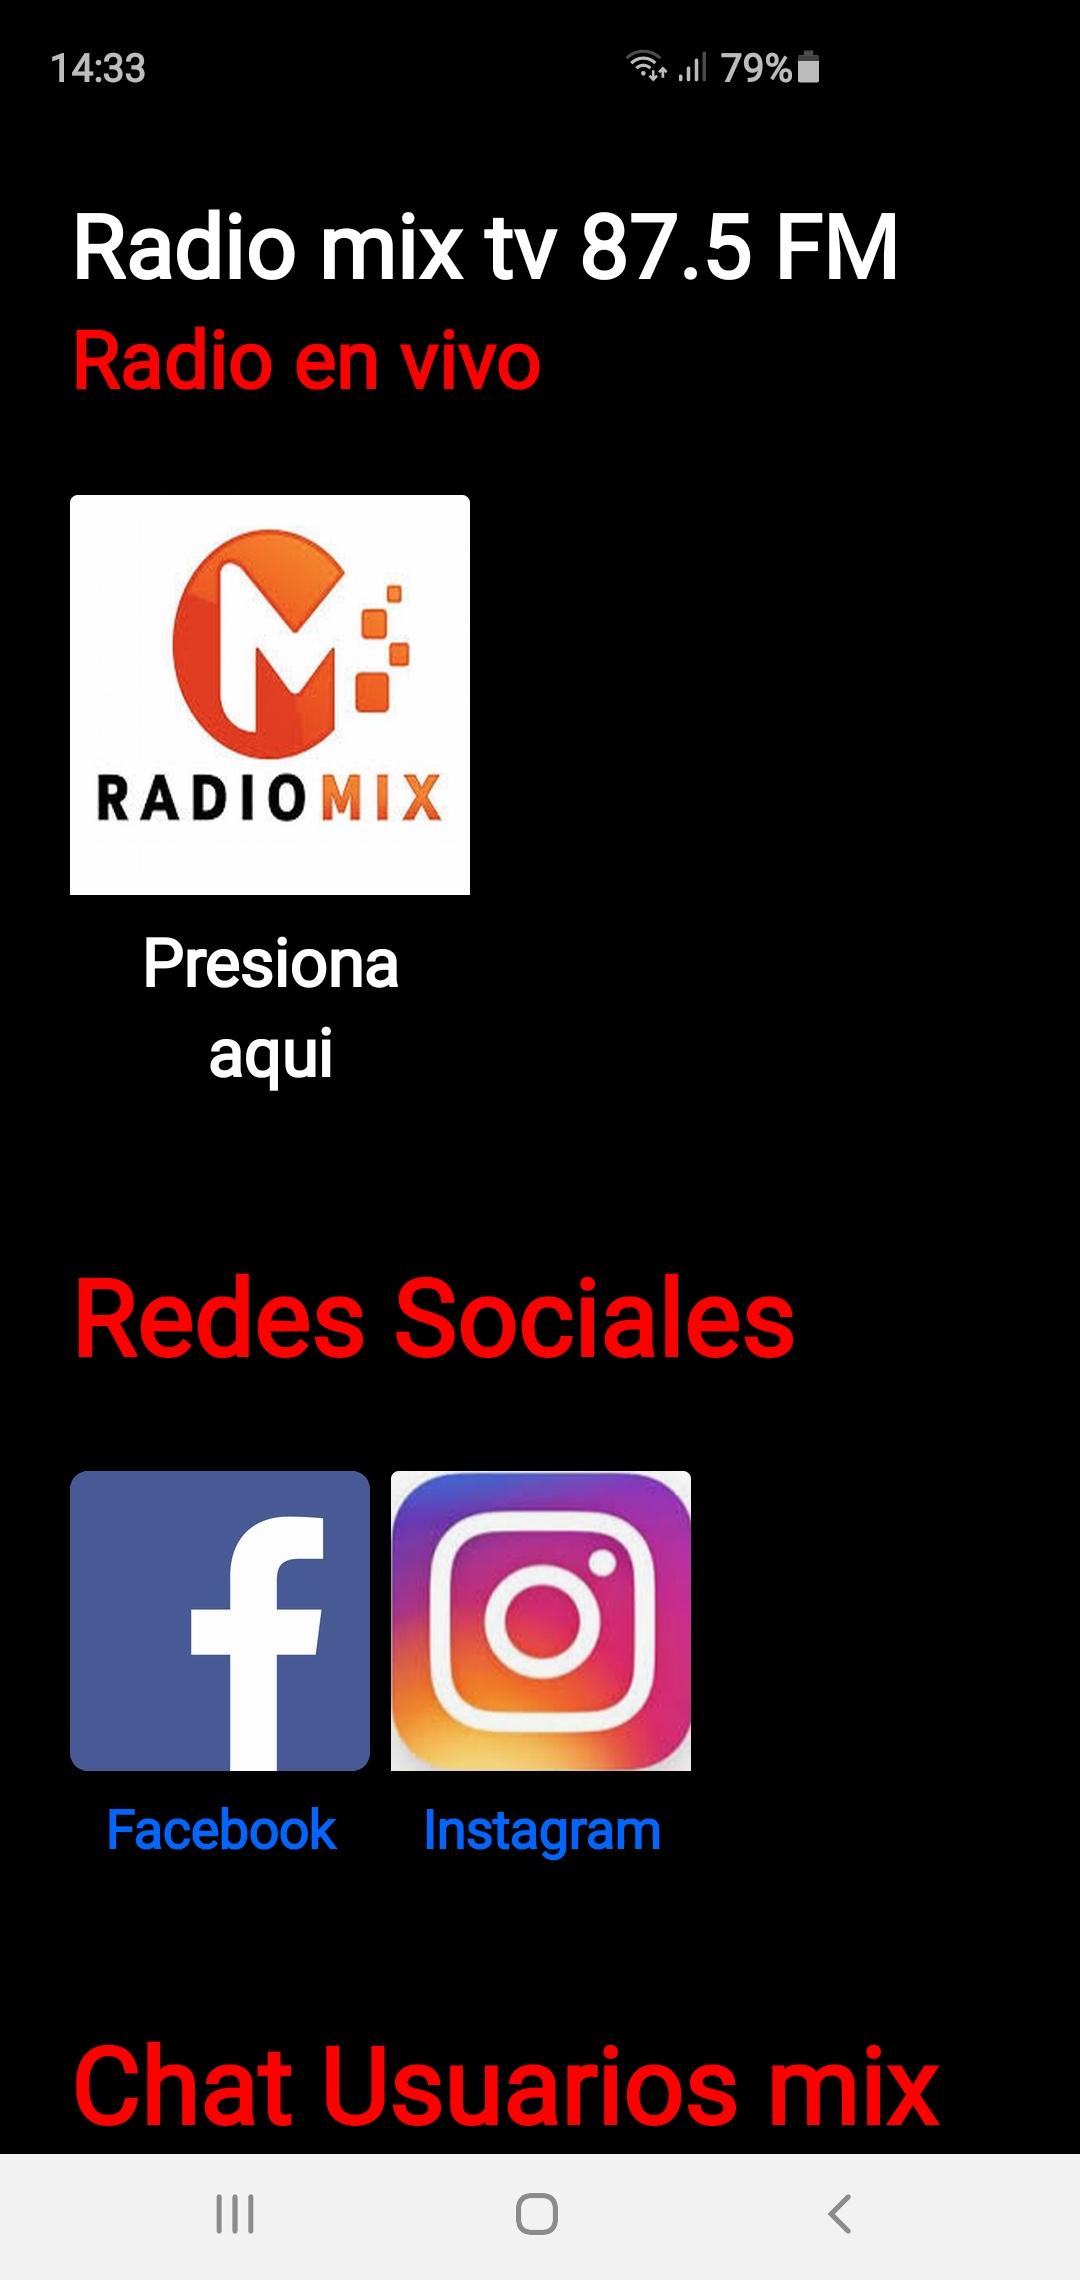 Radio Mix TV for Android - APK Download